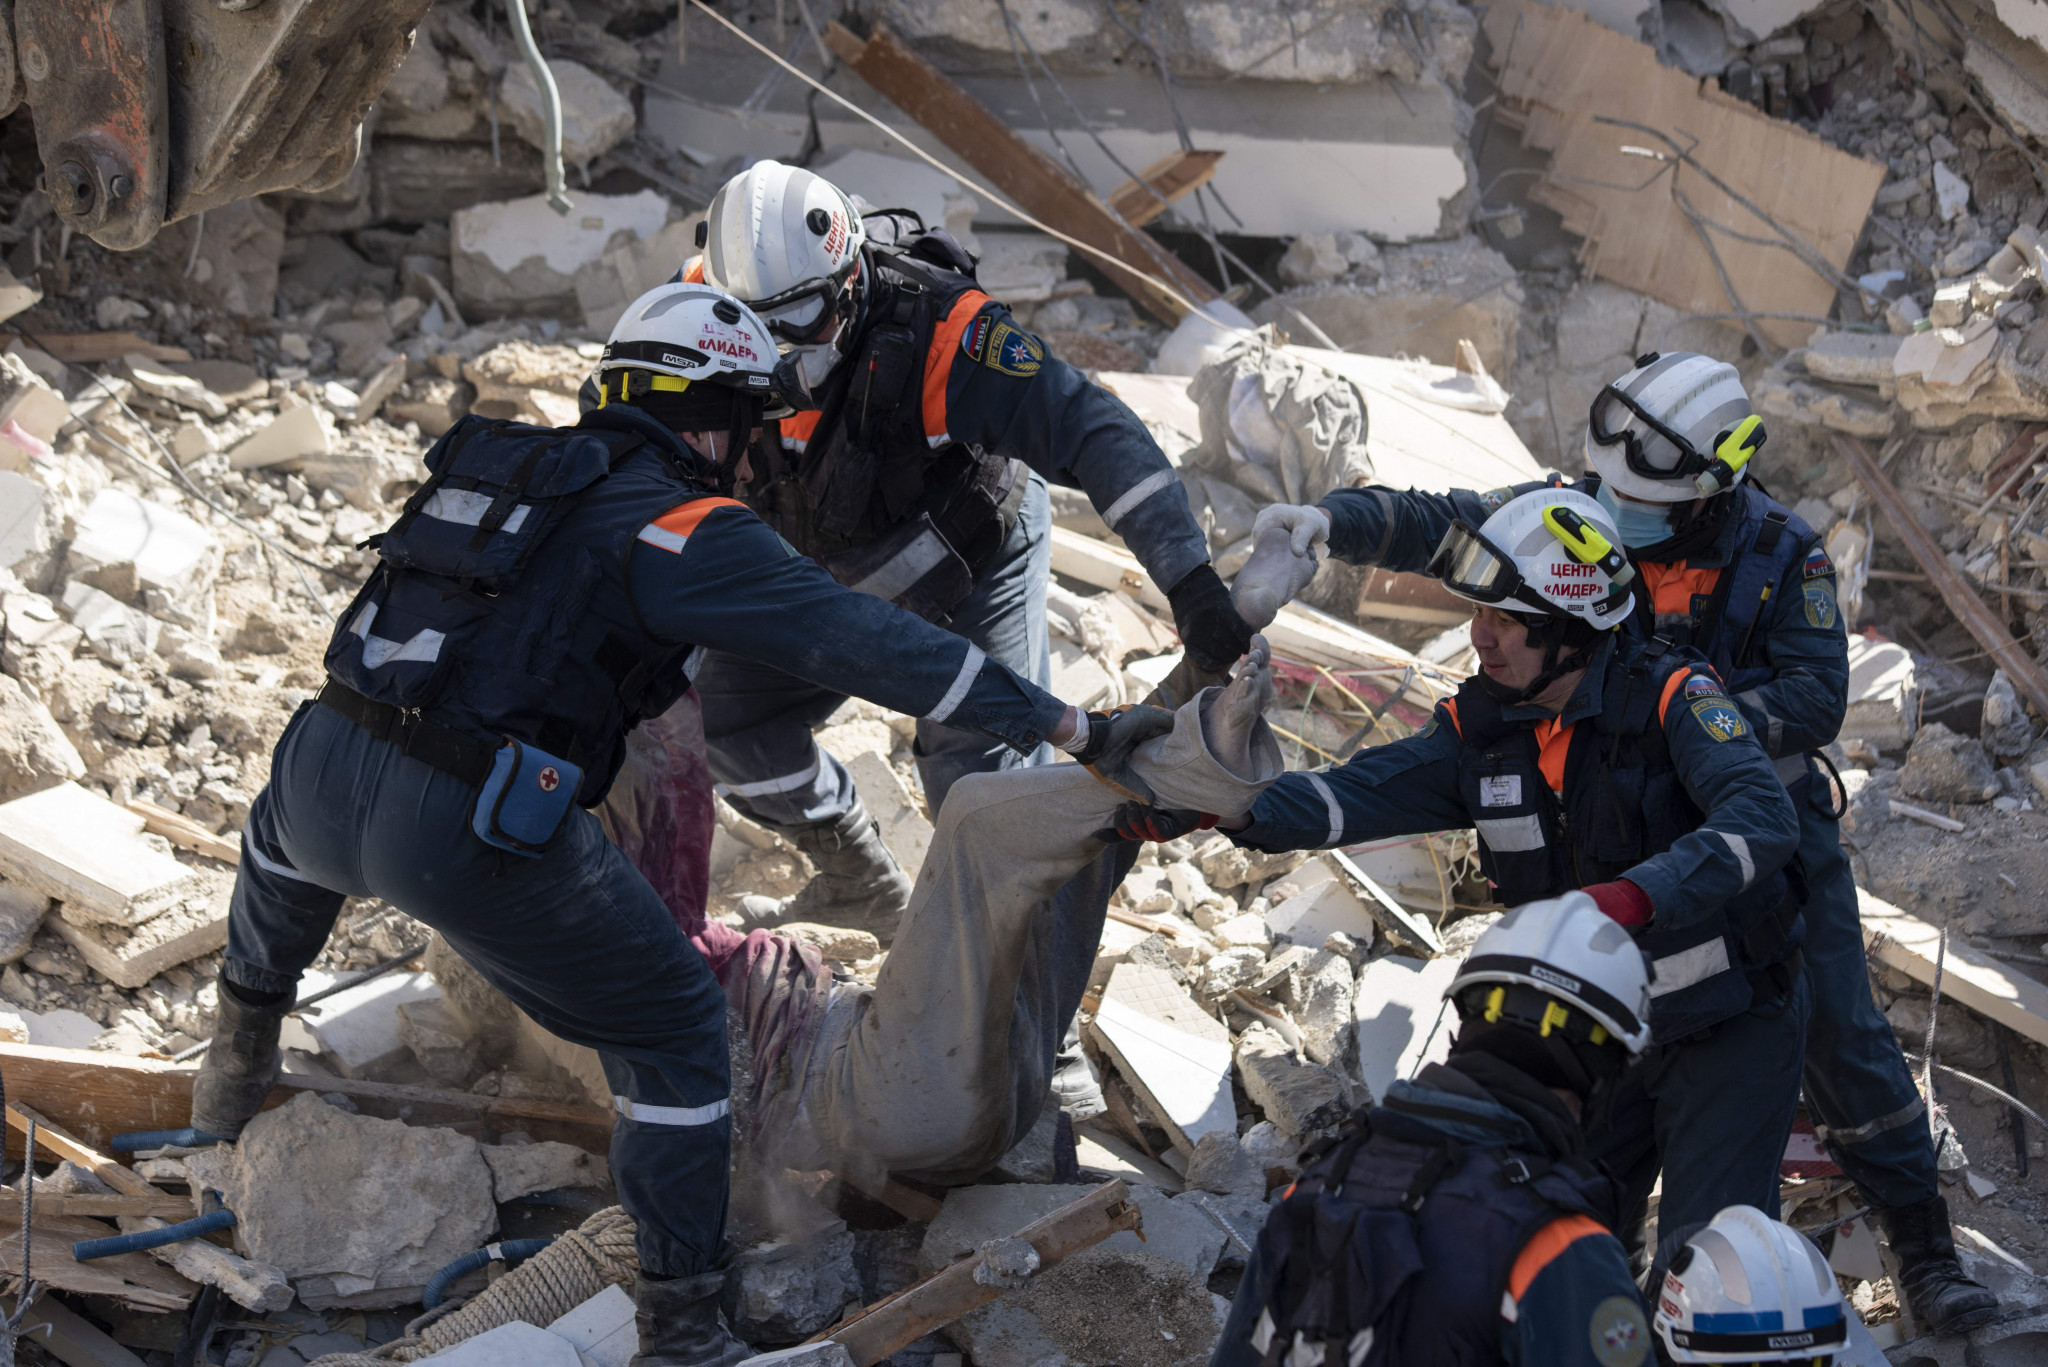 Rescue workers are continuing to pull people from the rubble ©Getty Images